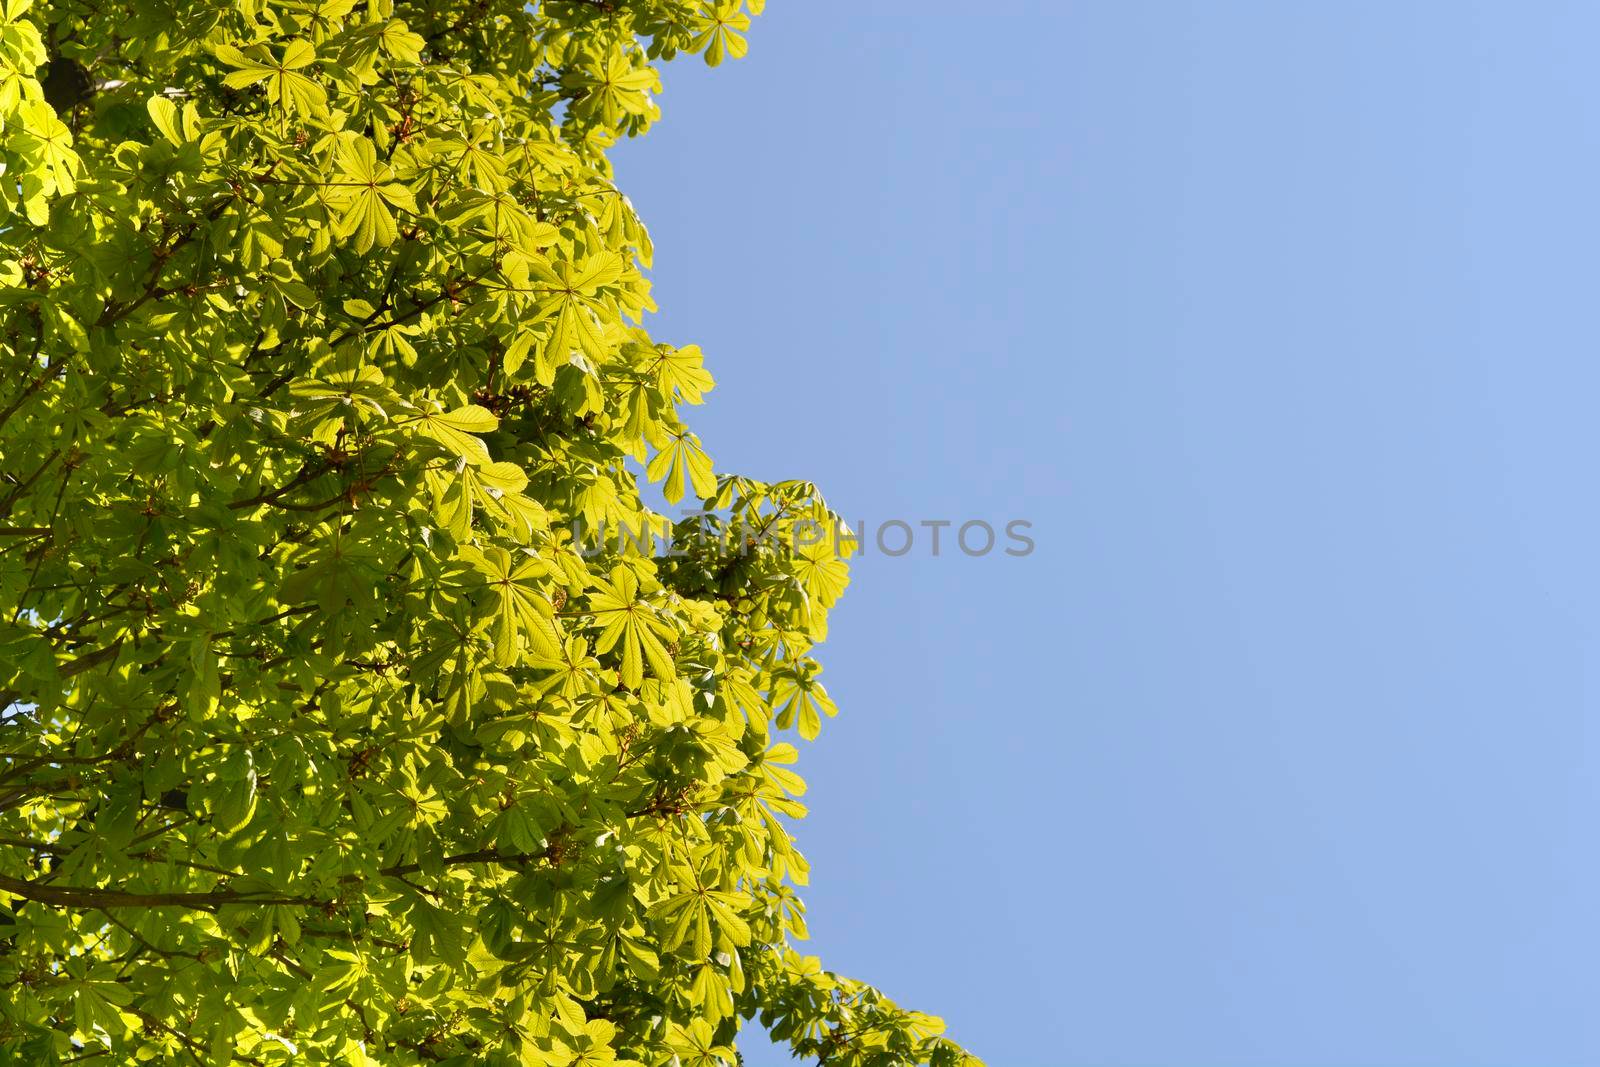 Common horse chestnut branches with leaves against blue sky - Latin name - Aesculus hippocastanum